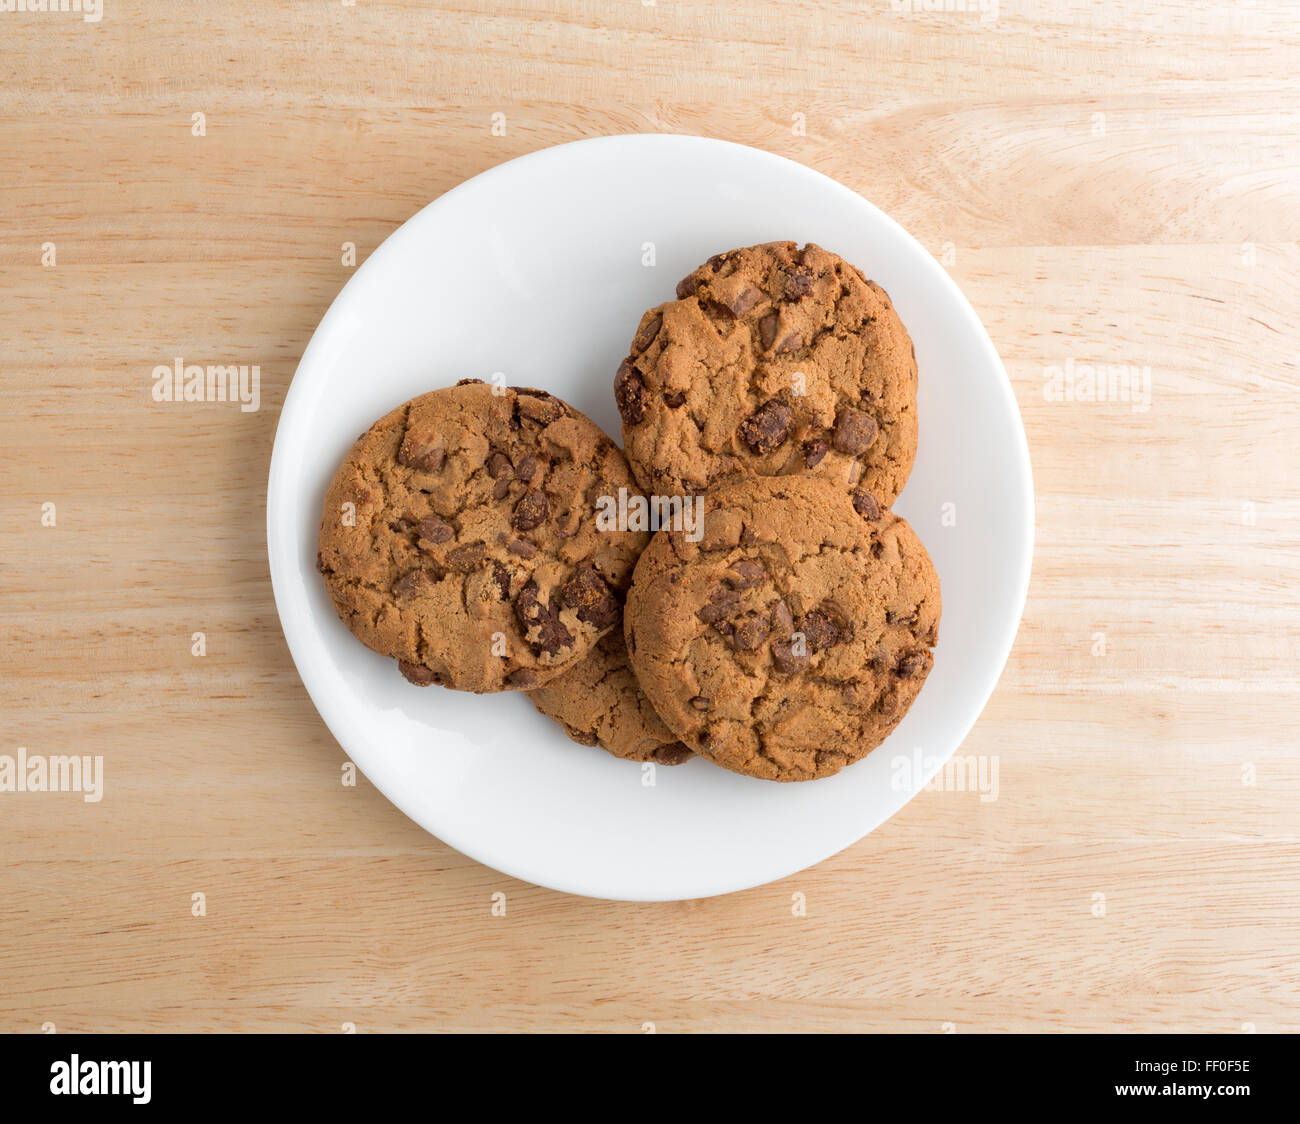 Top view of a plate of milk chocolate chip cookies on a wood table illuminated with natural light. Stock Photo